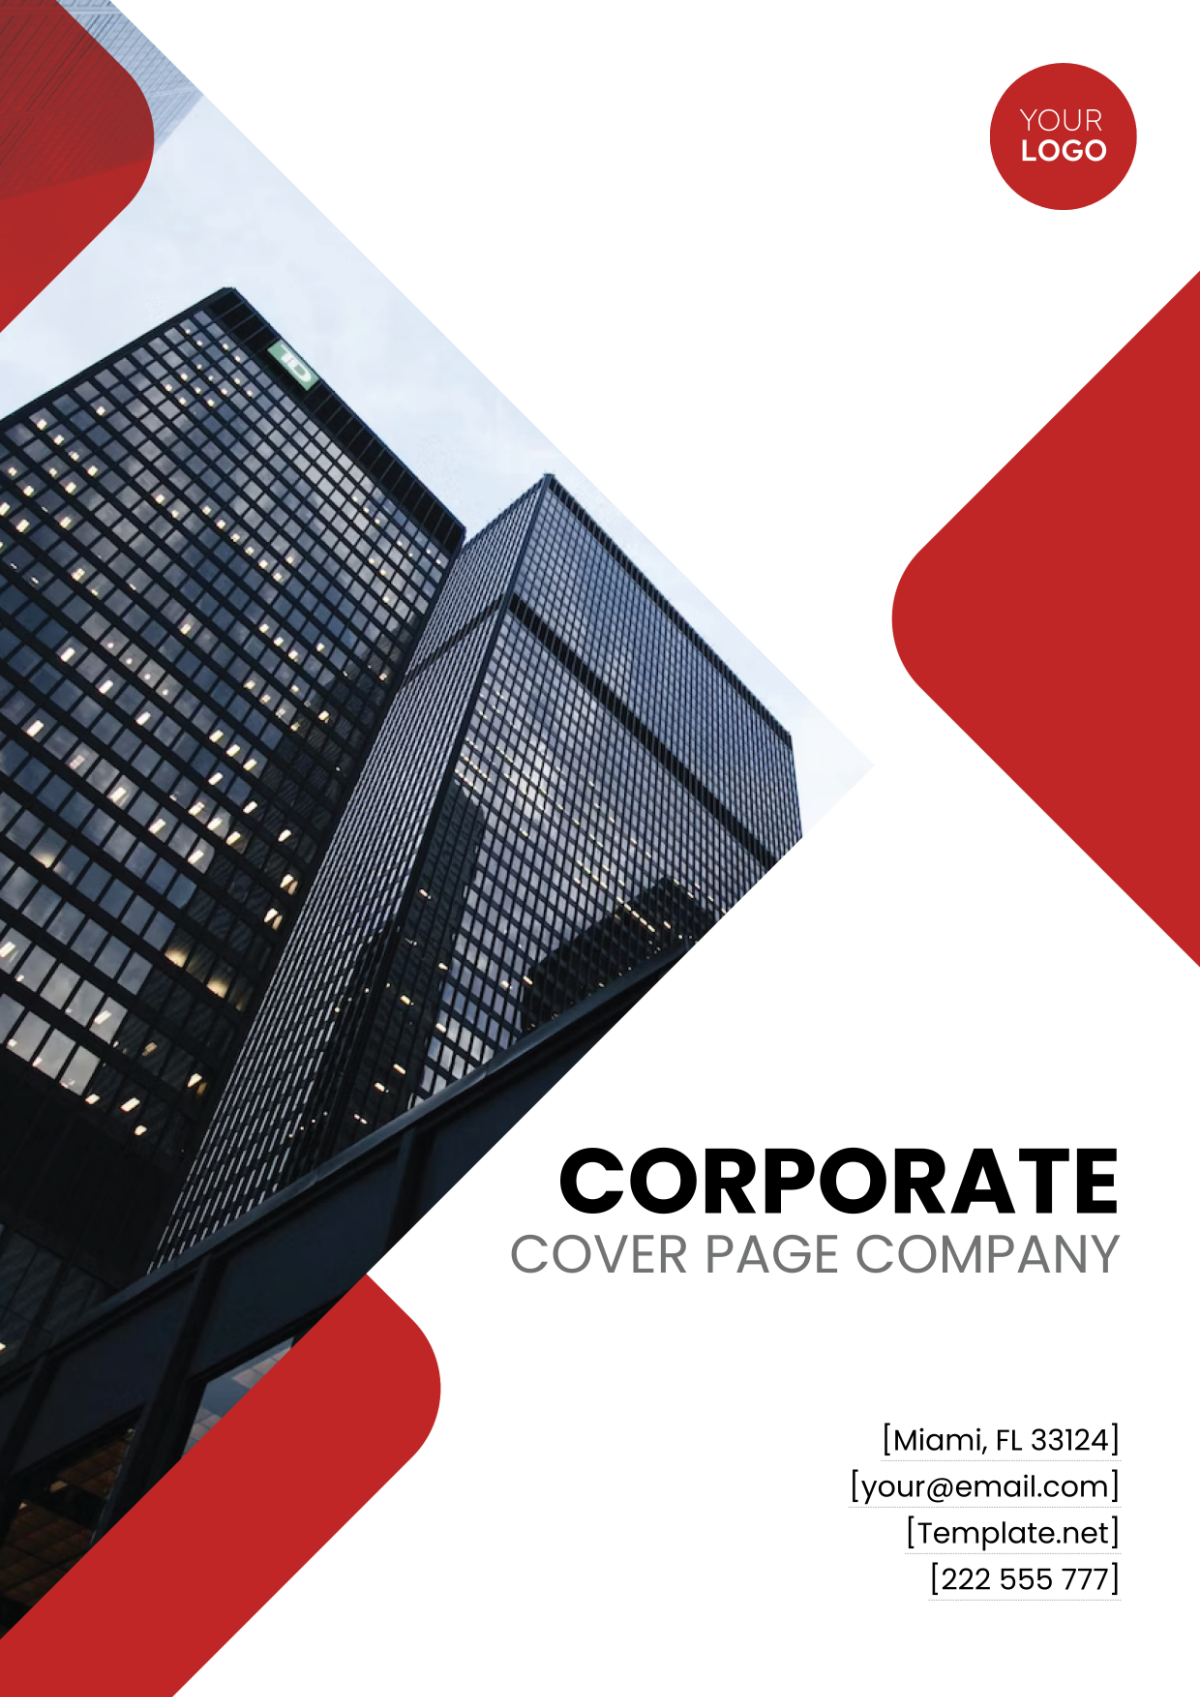 Corporate Cover Page Company